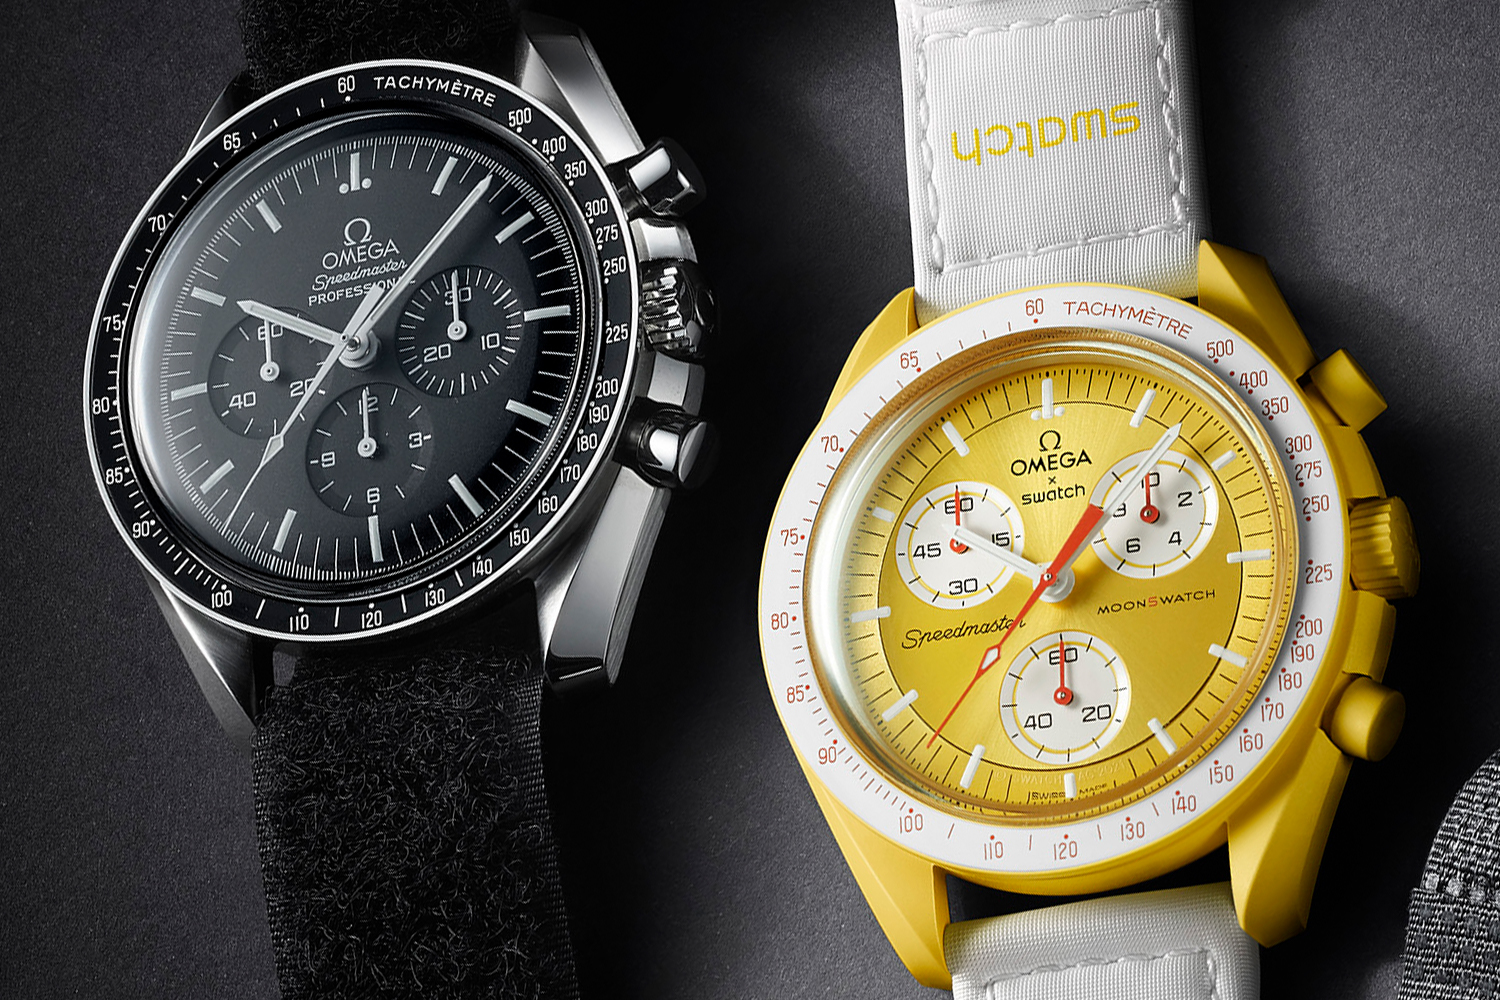 The original Omega Moonwatch next to the new Omega x Swatch MoonSwatch, specifically the golden Mission to the Sun model